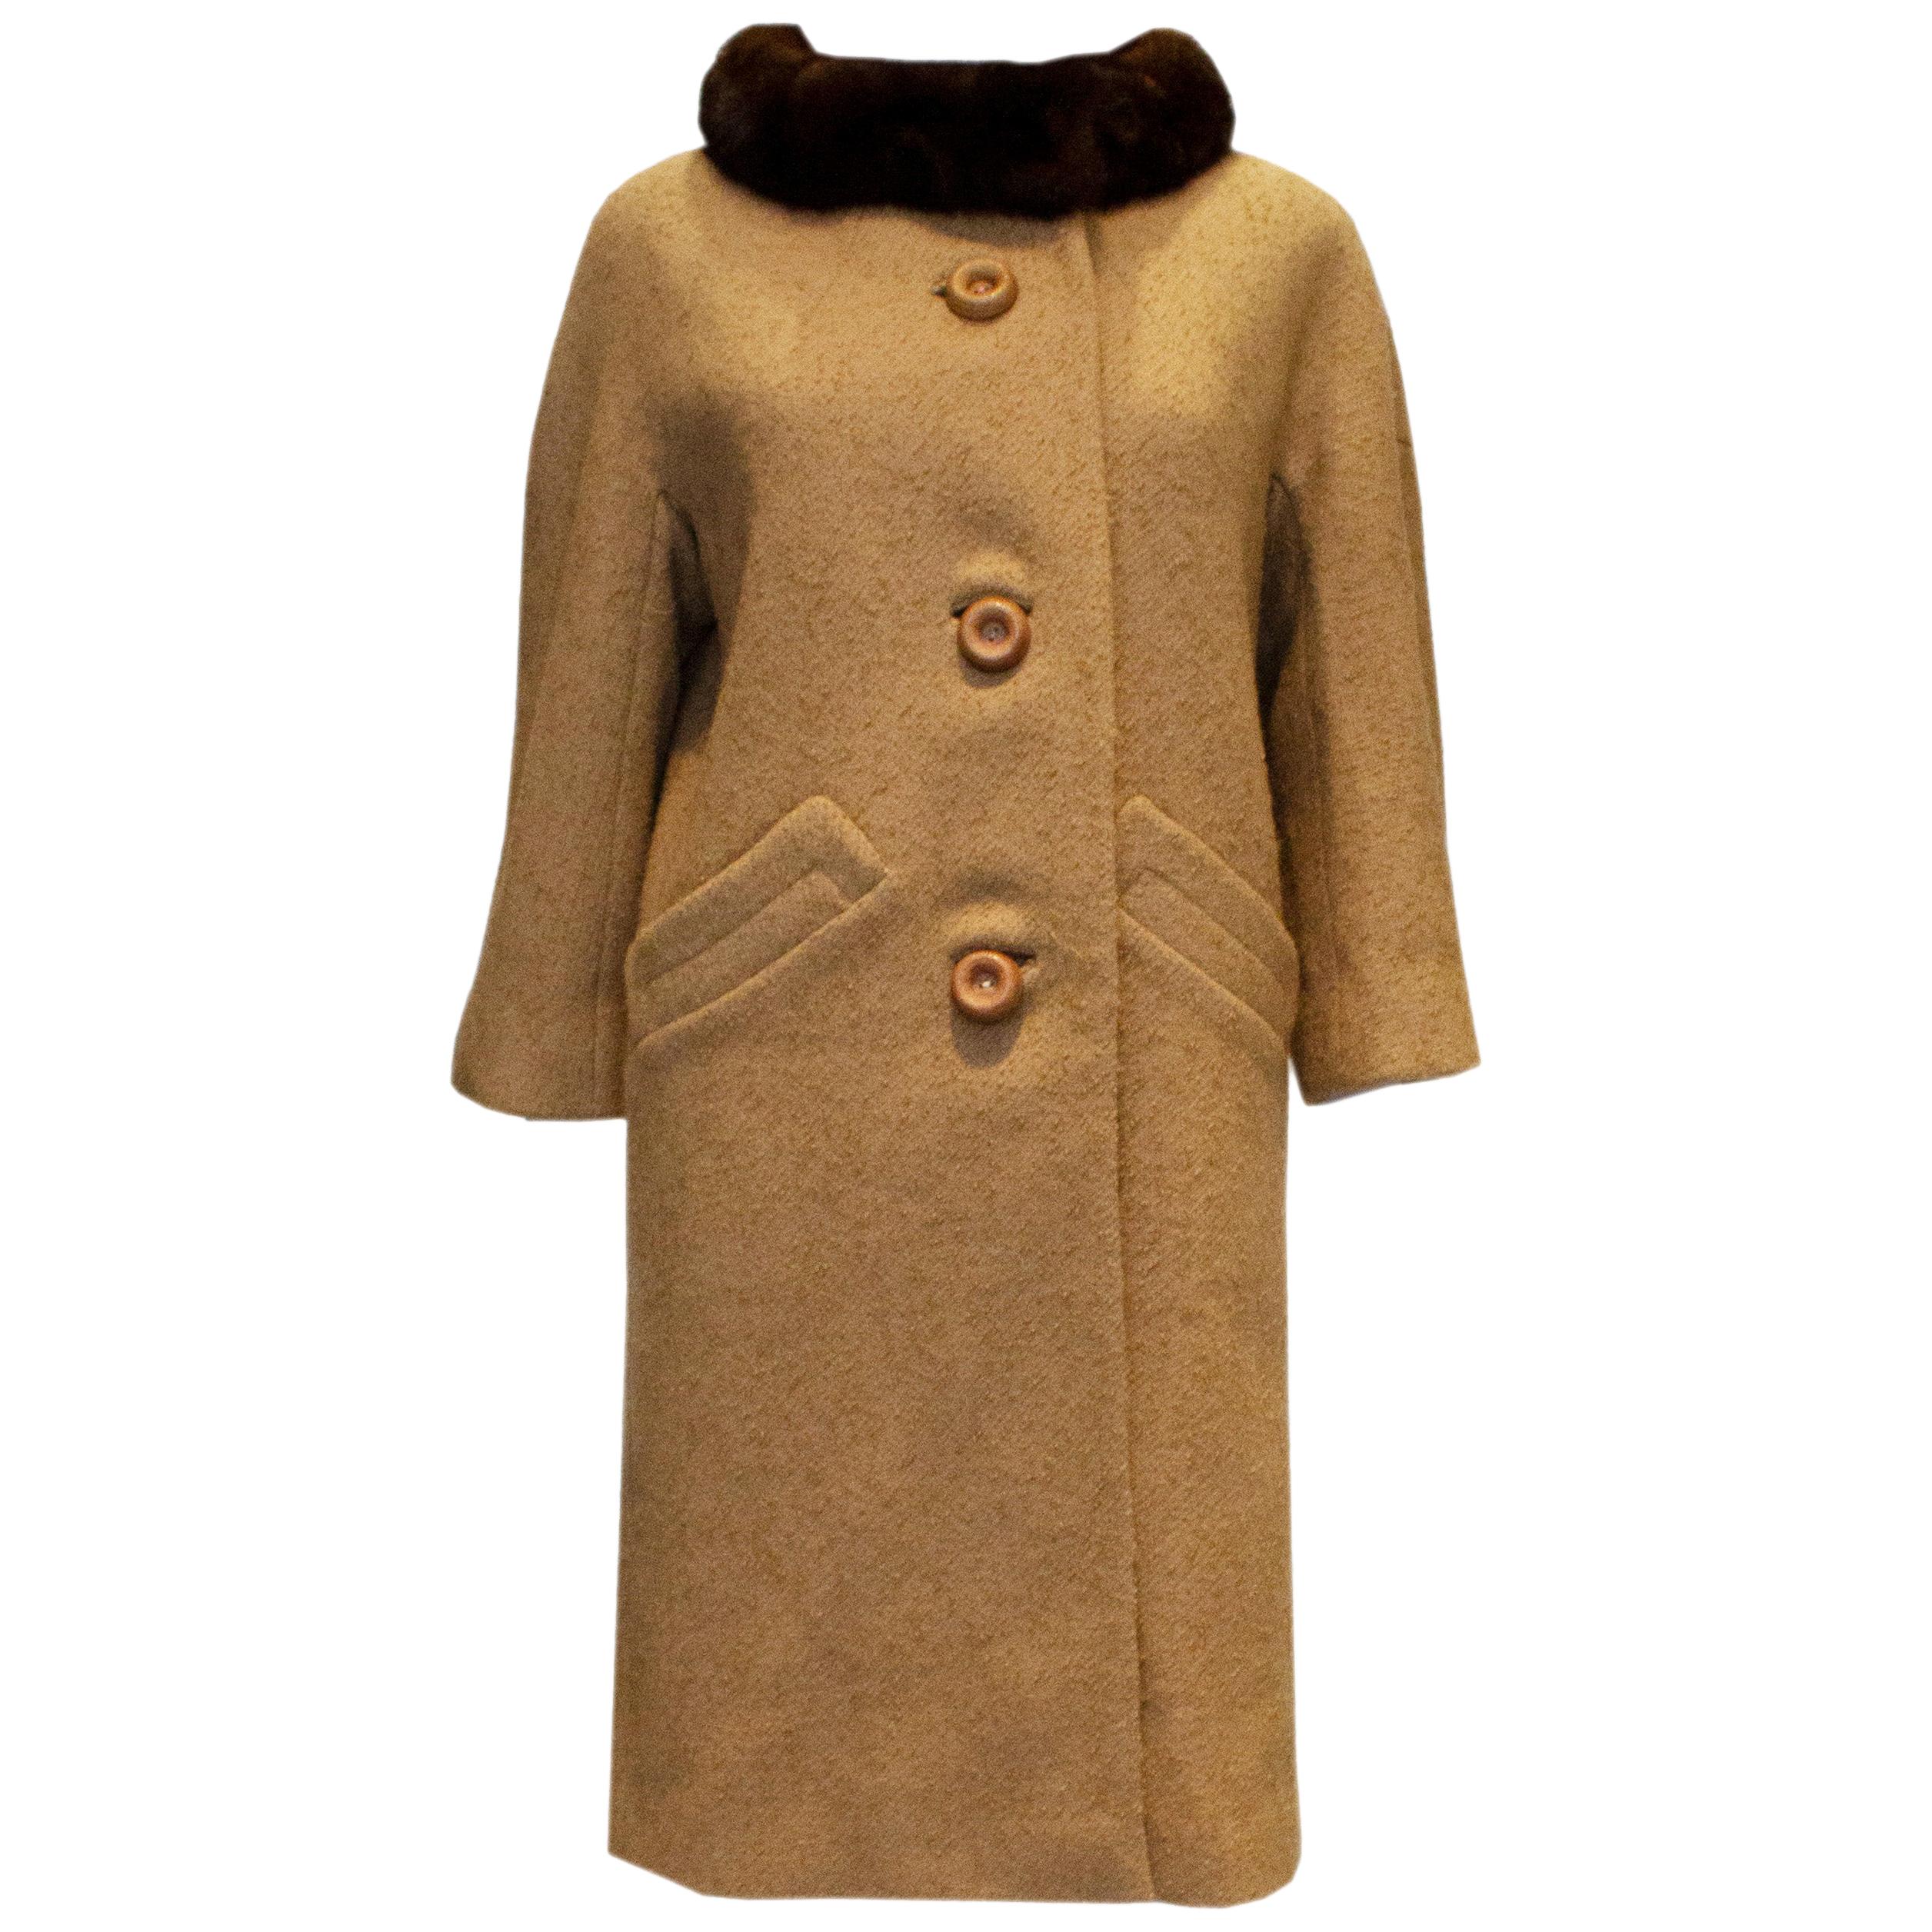 Vintage Caramel Wool and Mink Coat by Jeshiva For Sale